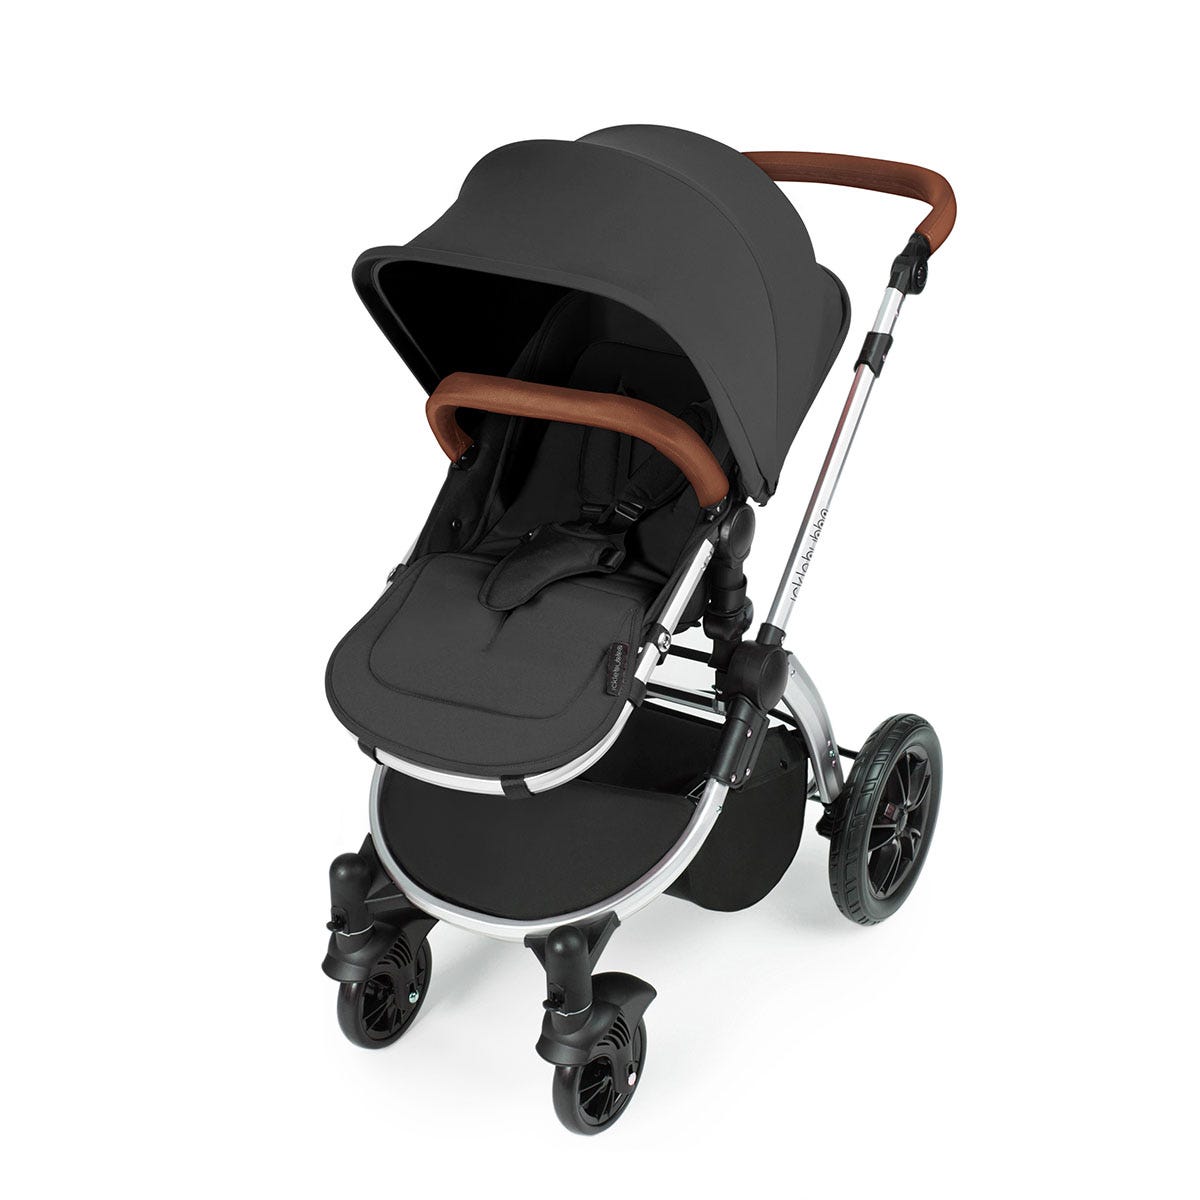 Ickle Bubba Stomp V3 All in One Travel System with Isofix Base - Graphite Grey on Silver with Tan Handles